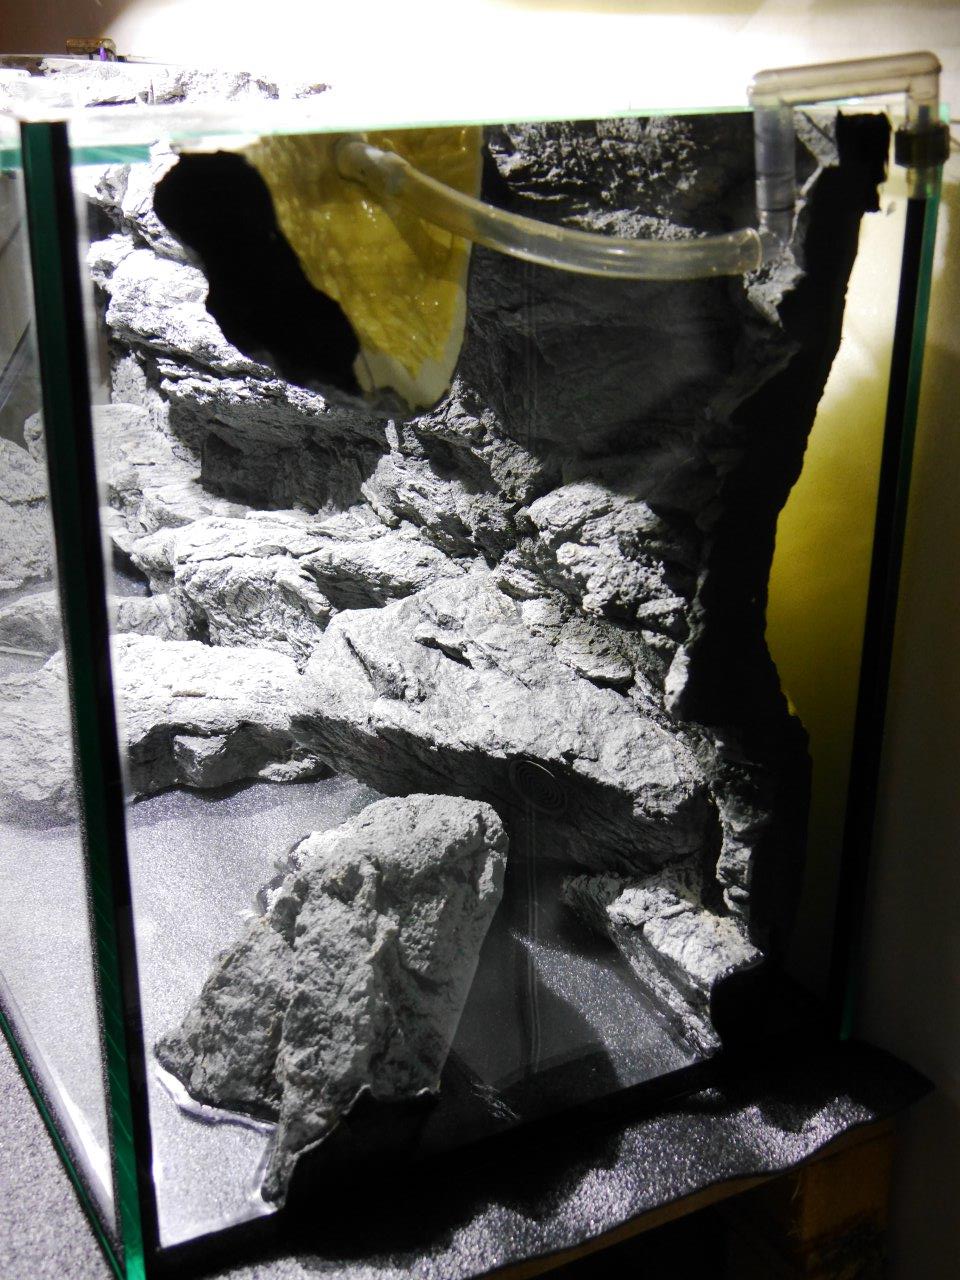 Rocks and filtration